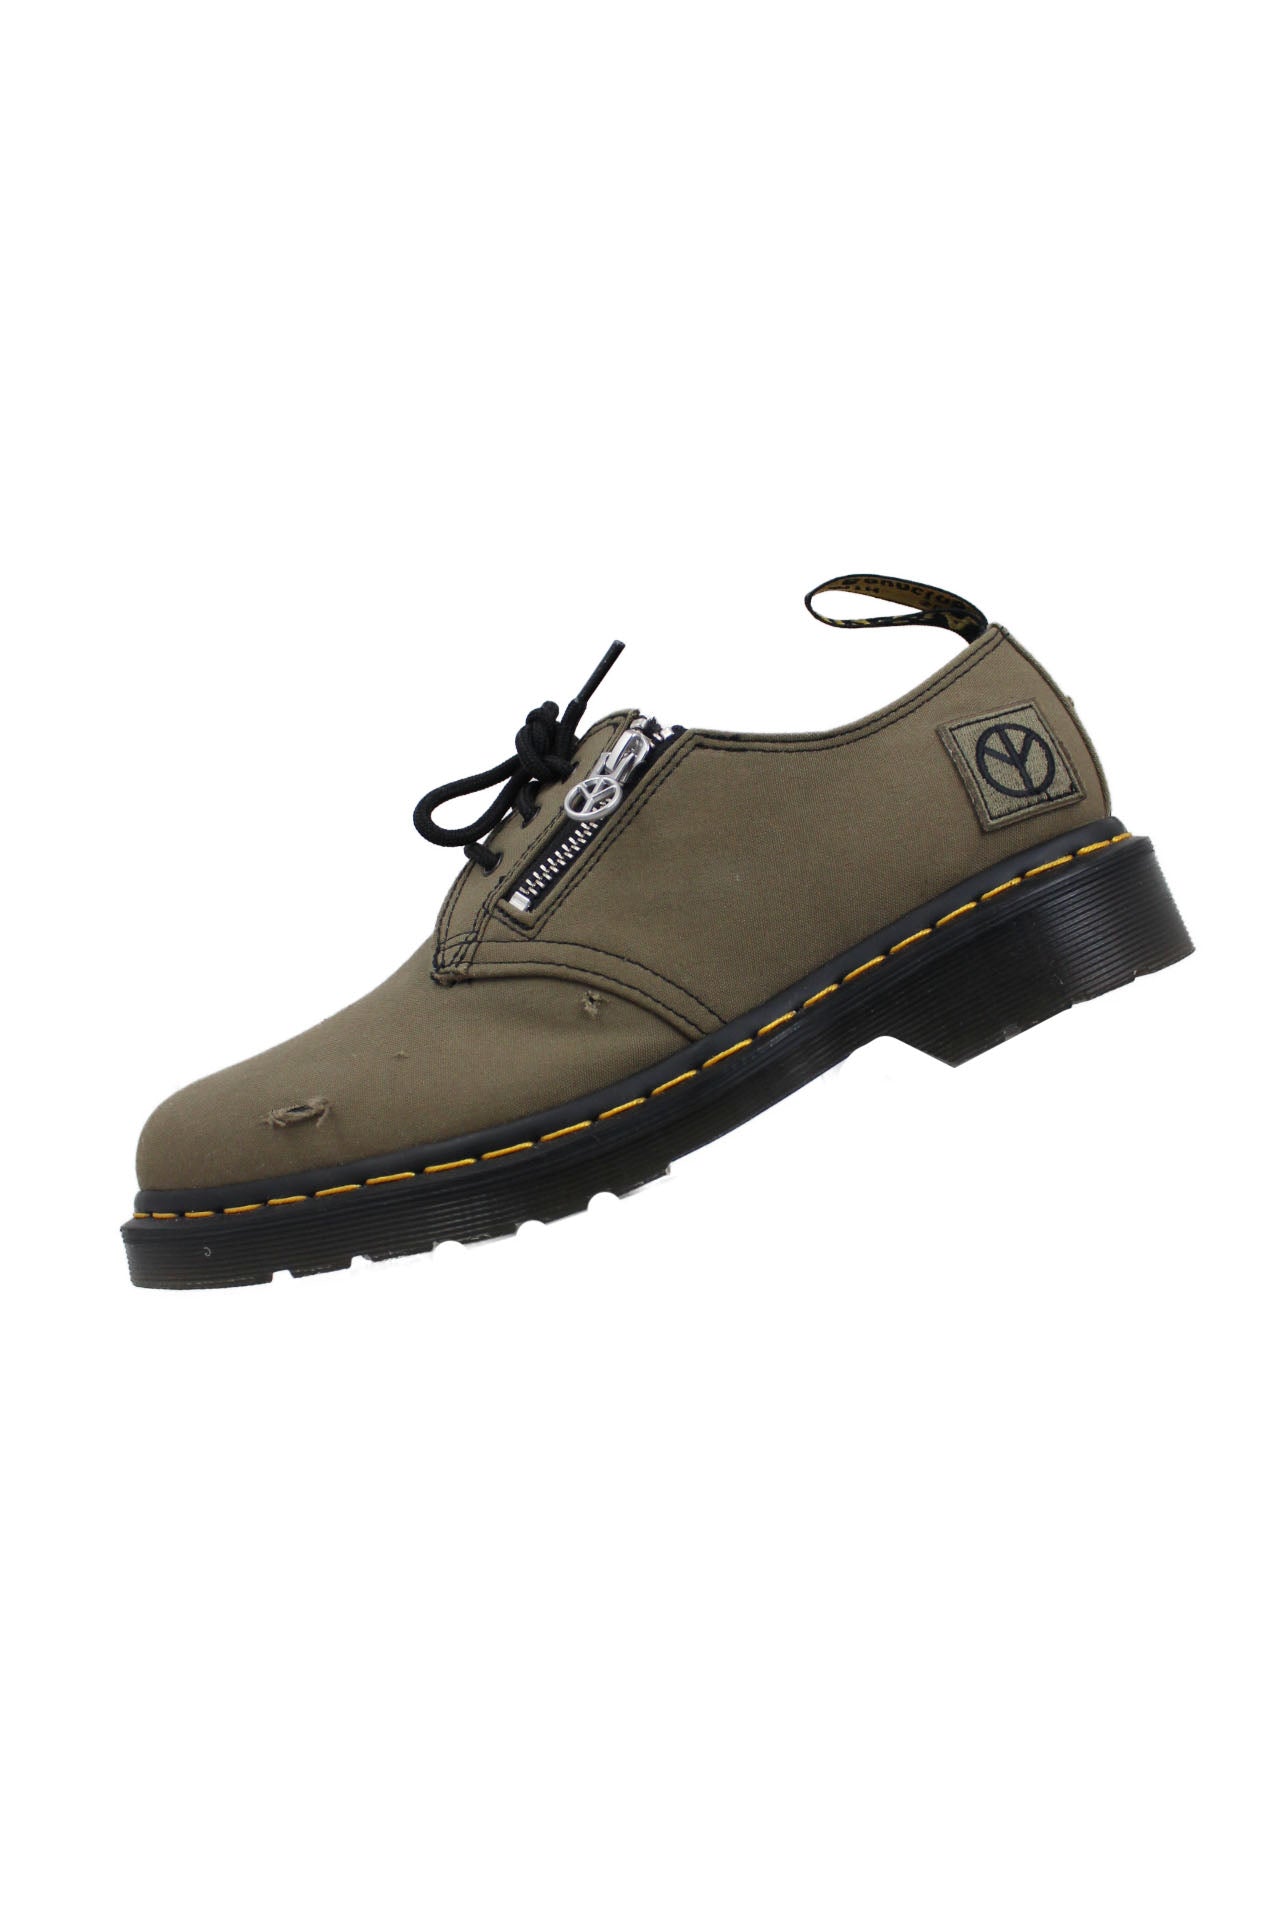 description: dr. martens dark green babylon canvas leather shoes. features exterior zip with babylon la puller, chaos sole pad print, tear-way fabric and rounded toe silhouette. 